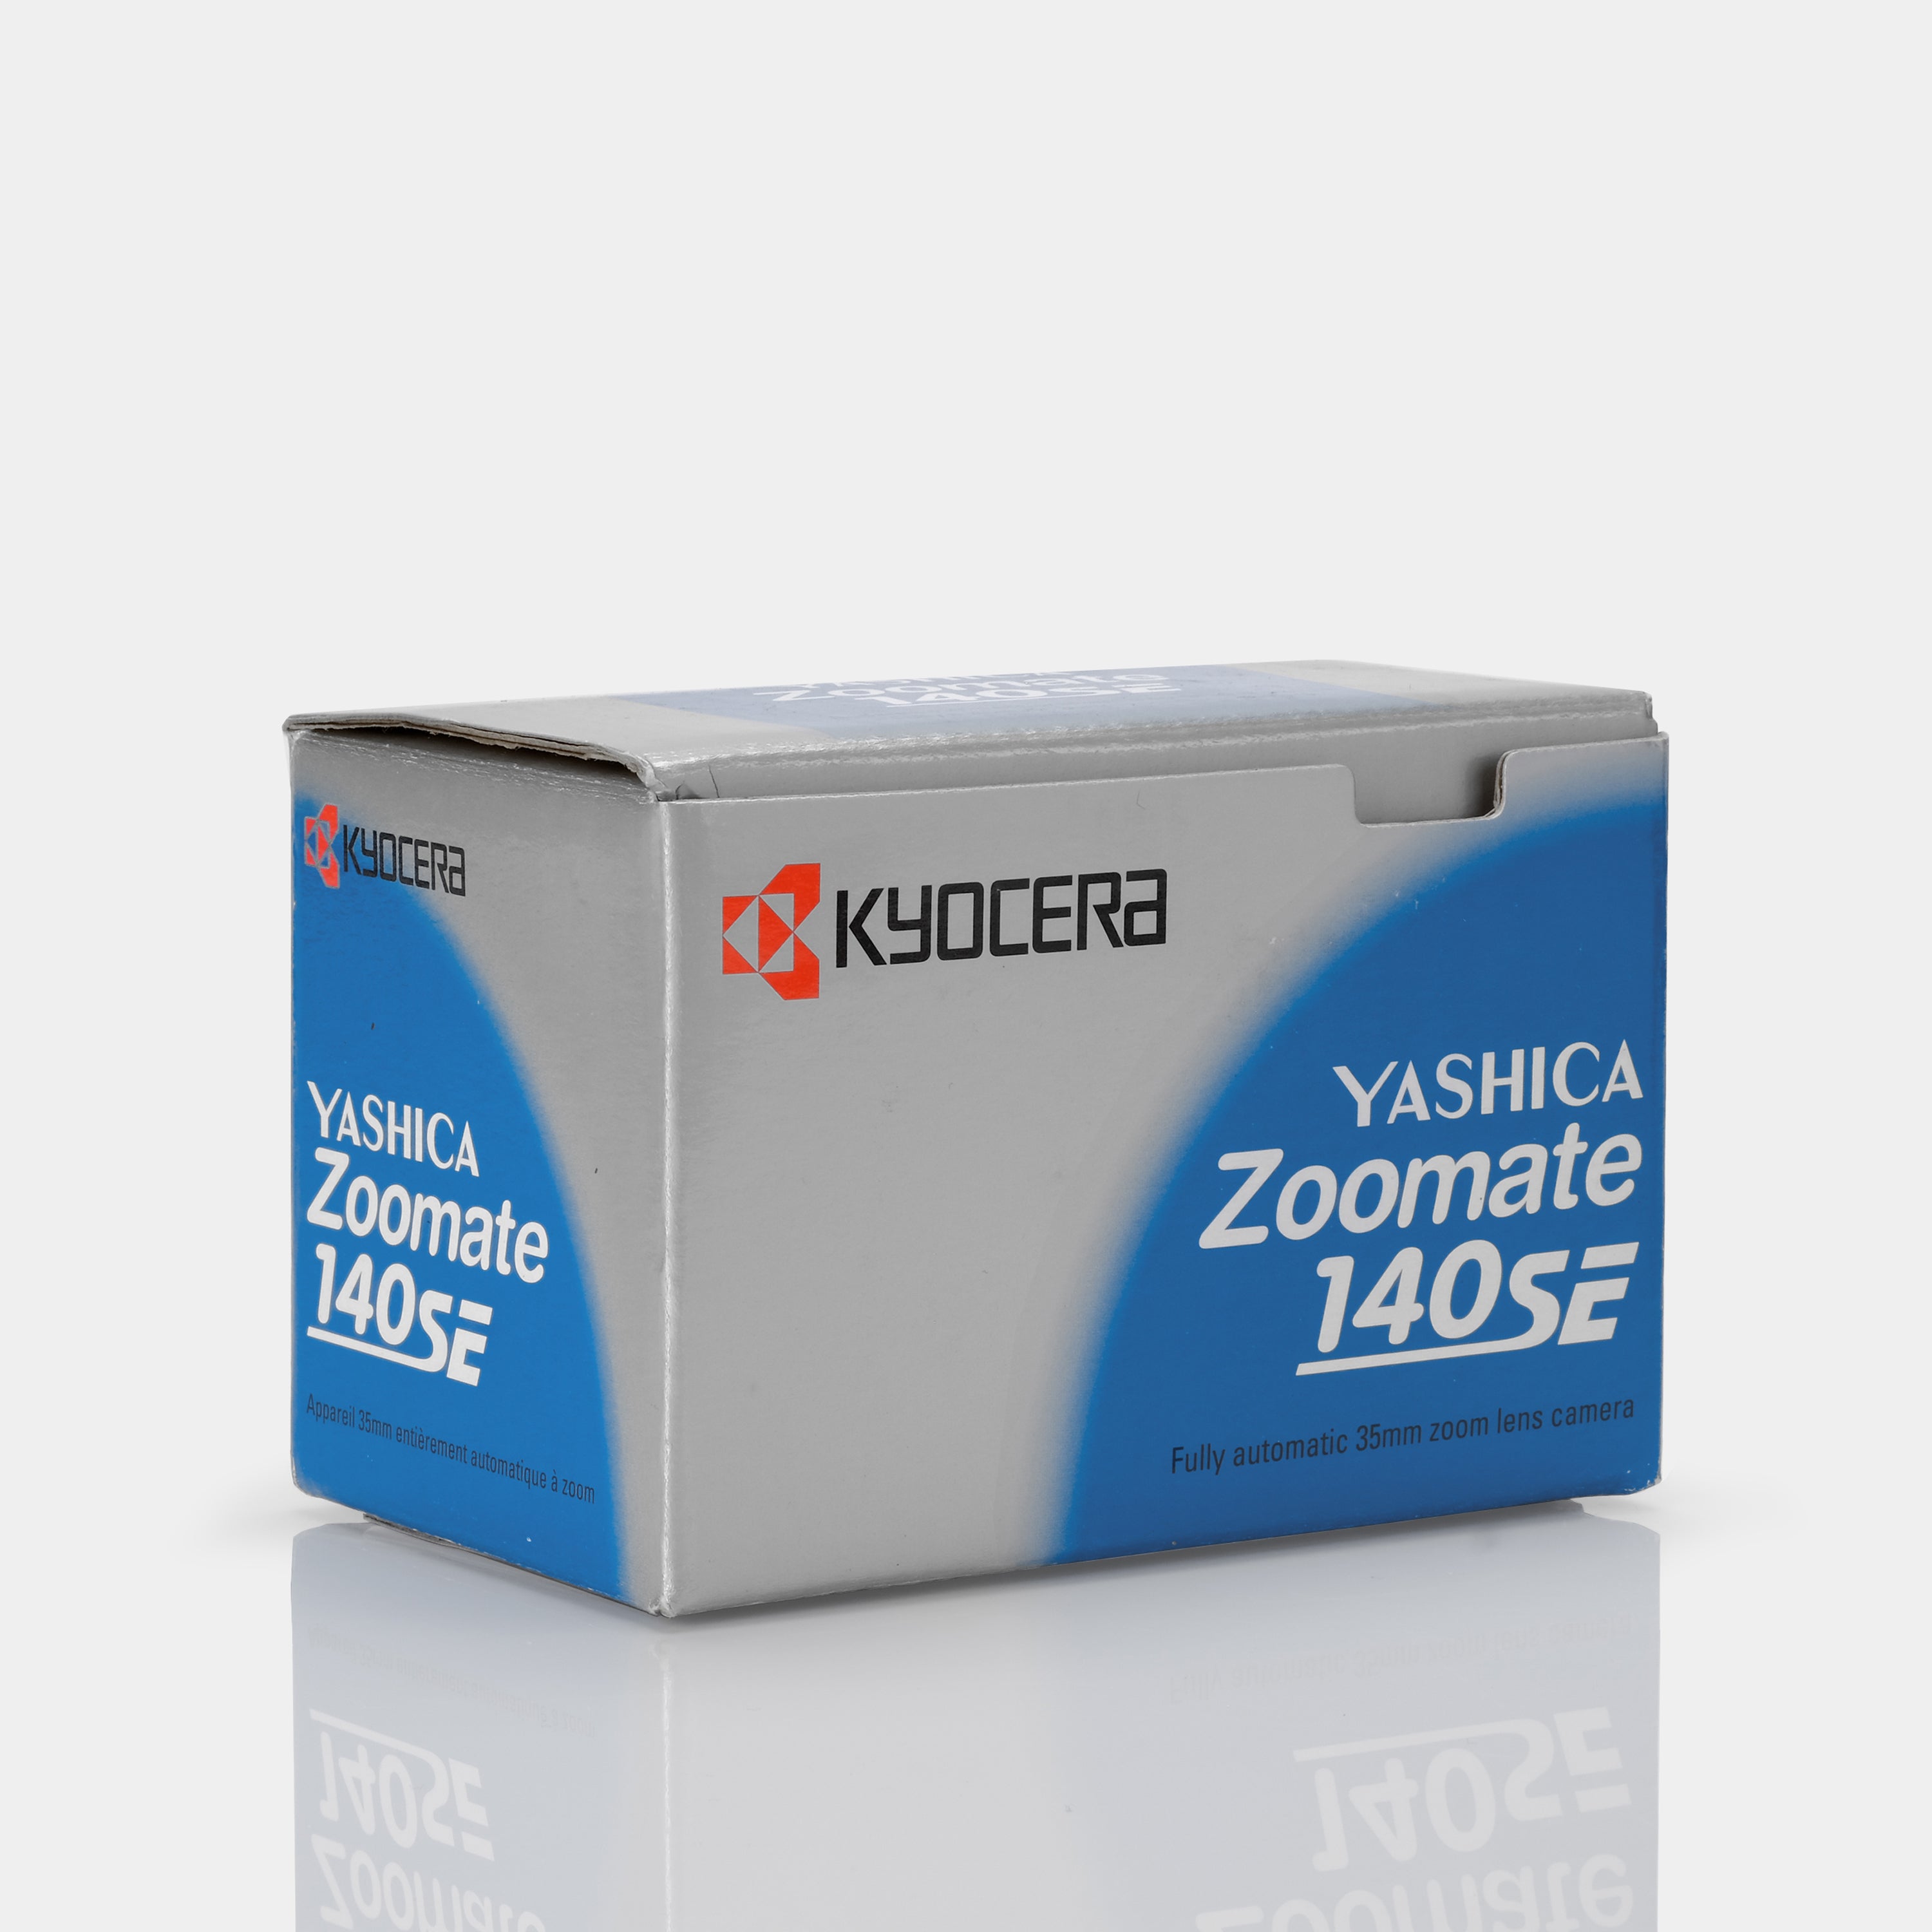 Kyocera Yashica Zoomate 140SE 35mm Point And Shoot Film Camera (New Old Stock)